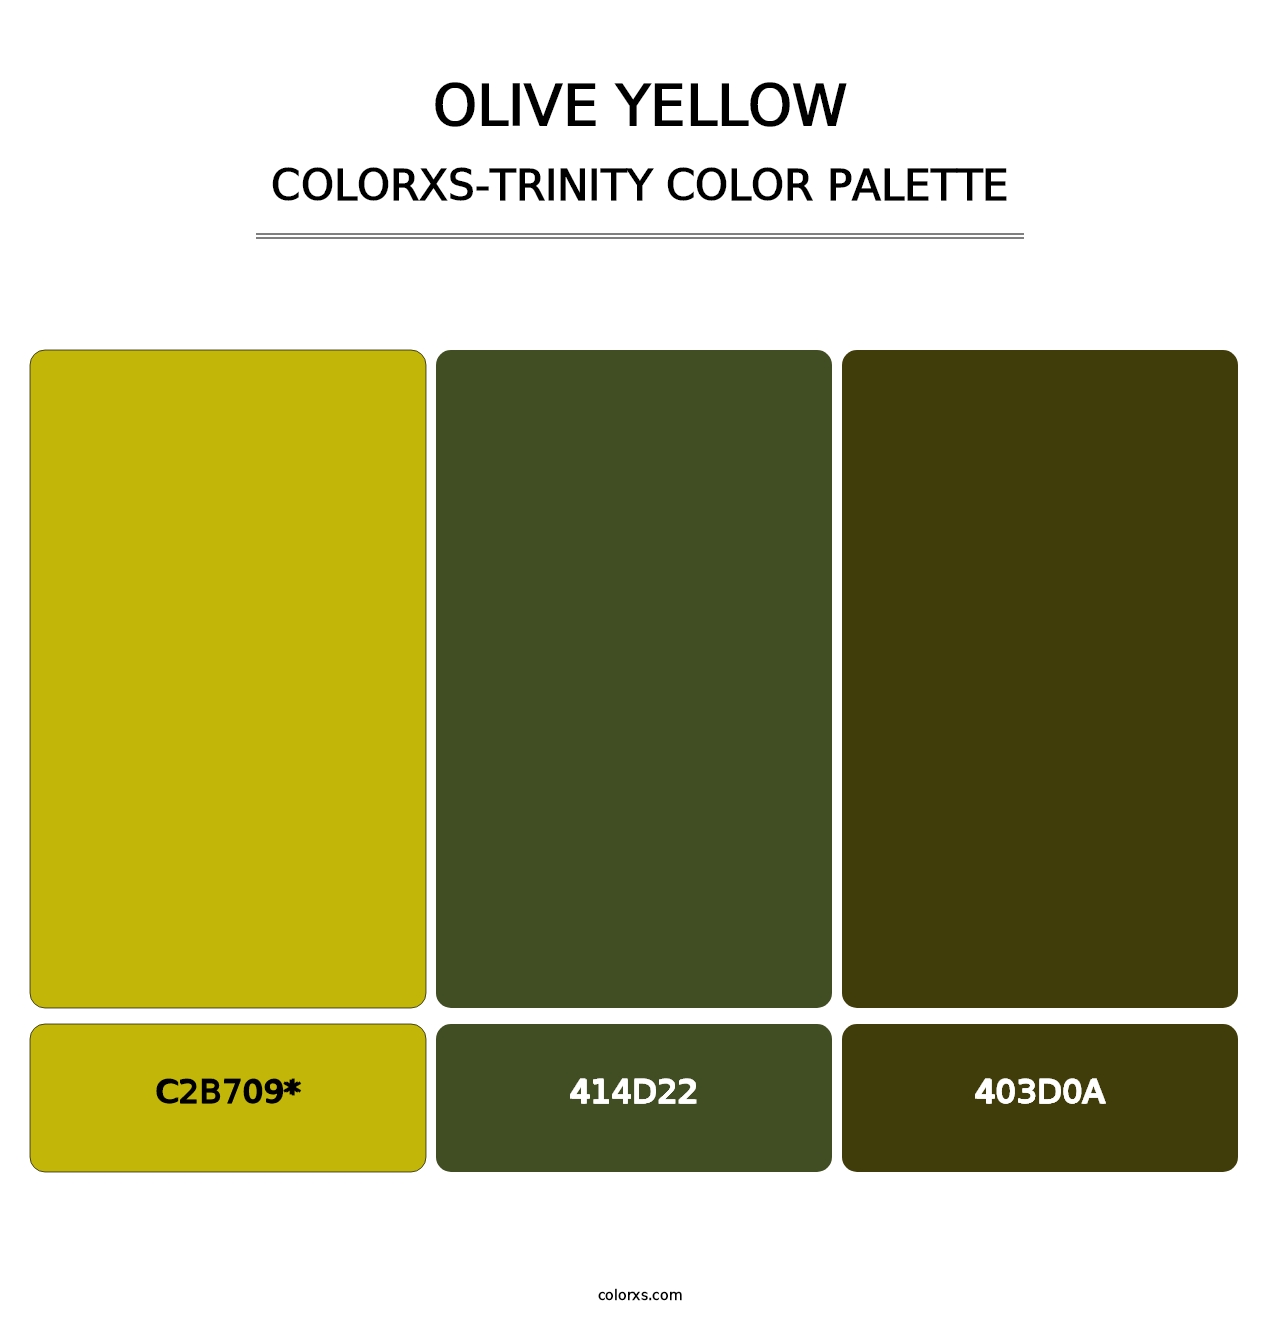 Olive Yellow - Colorxs Trinity Palette